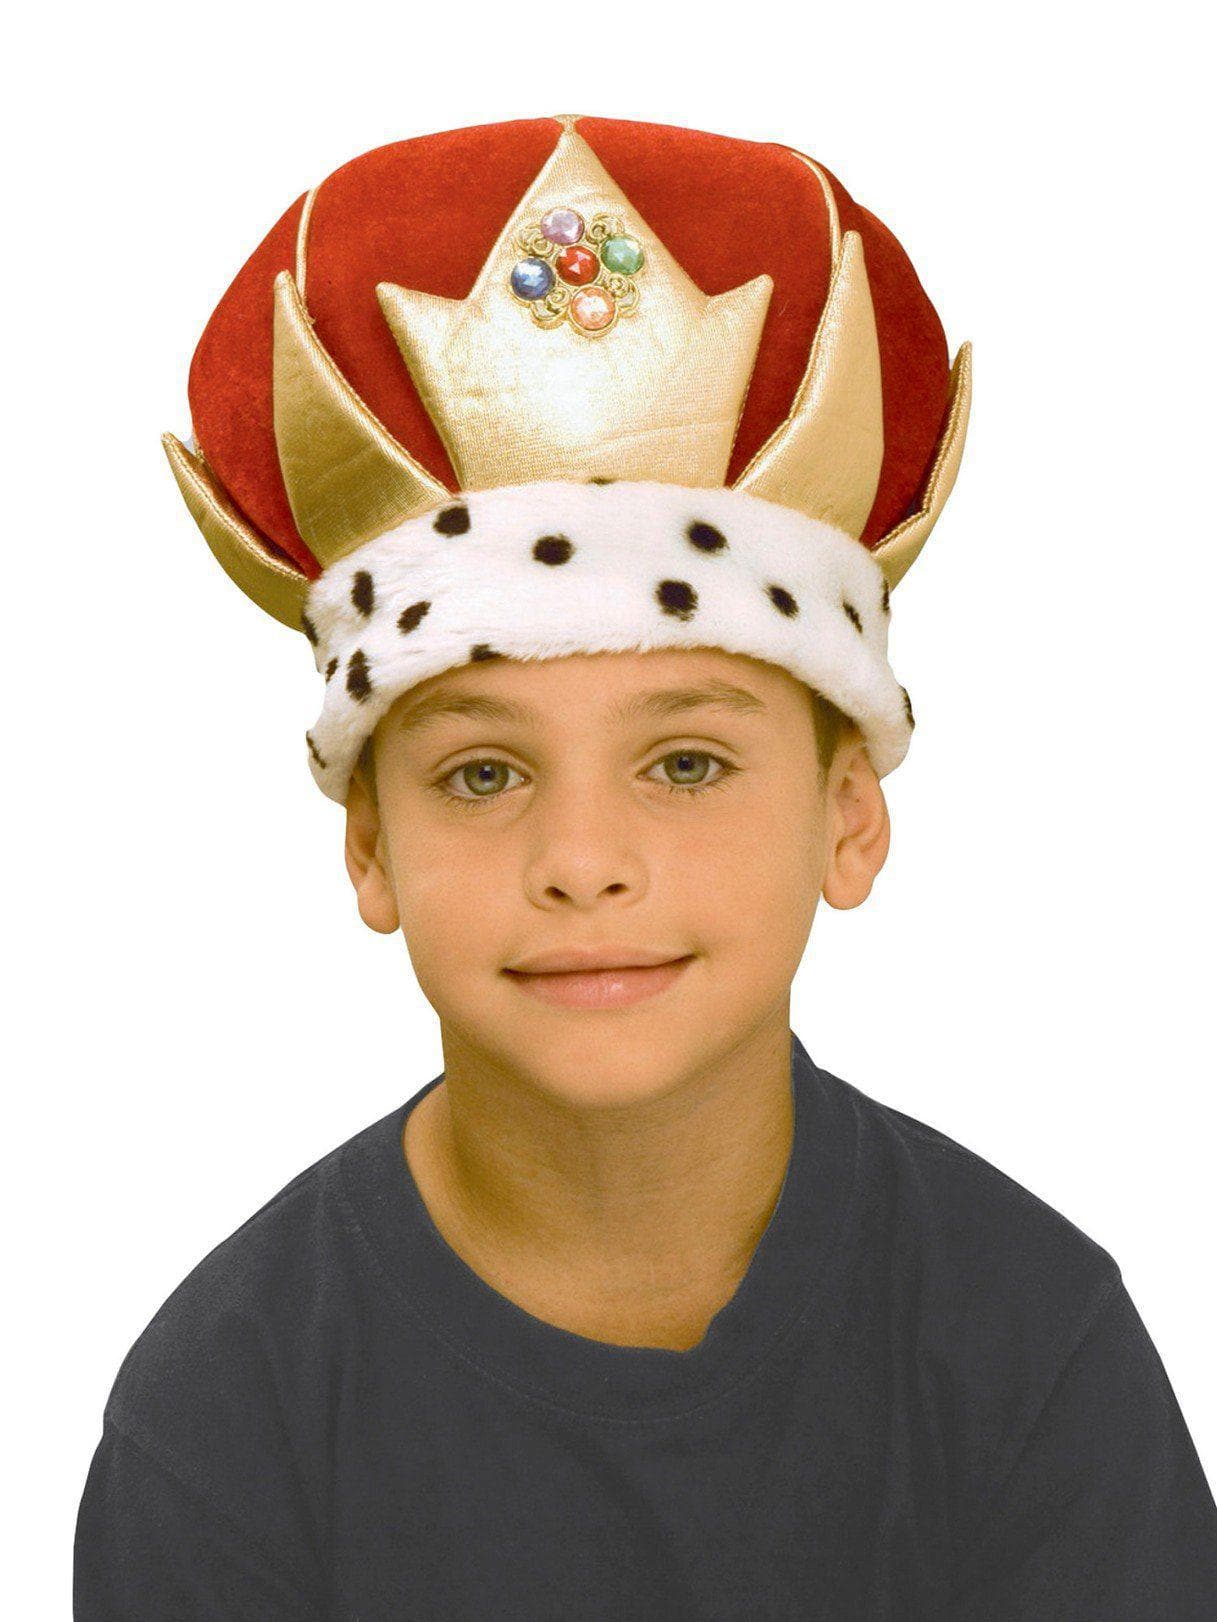 Kings Child Crown - costumes.com